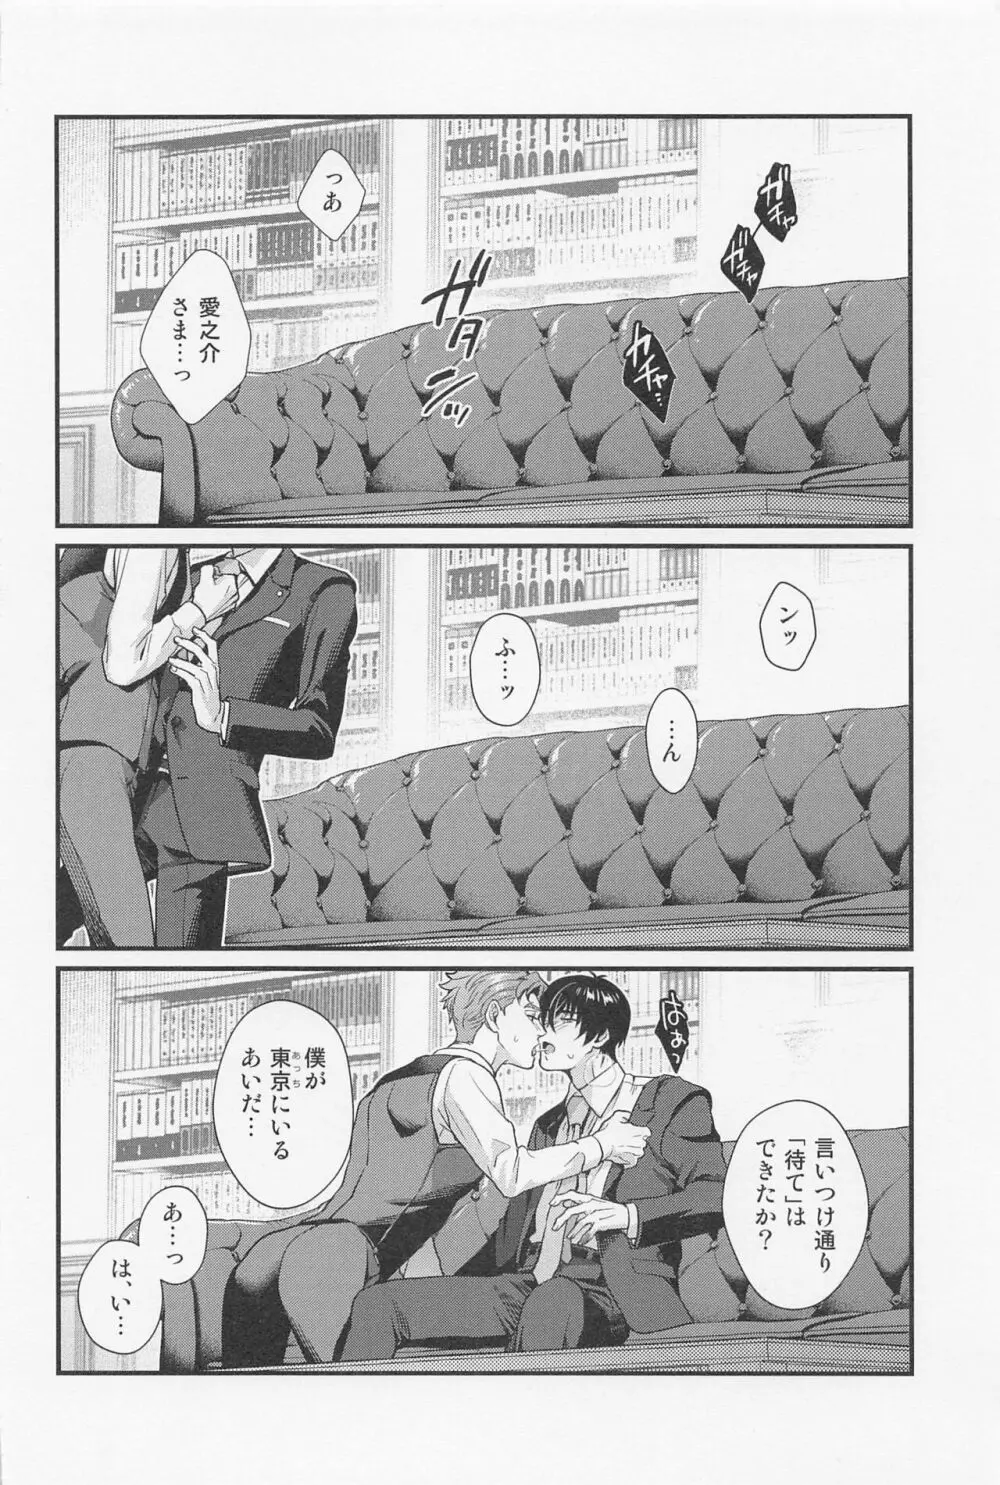 LOVE FIXED POINT - 愛の定点観測 - page5